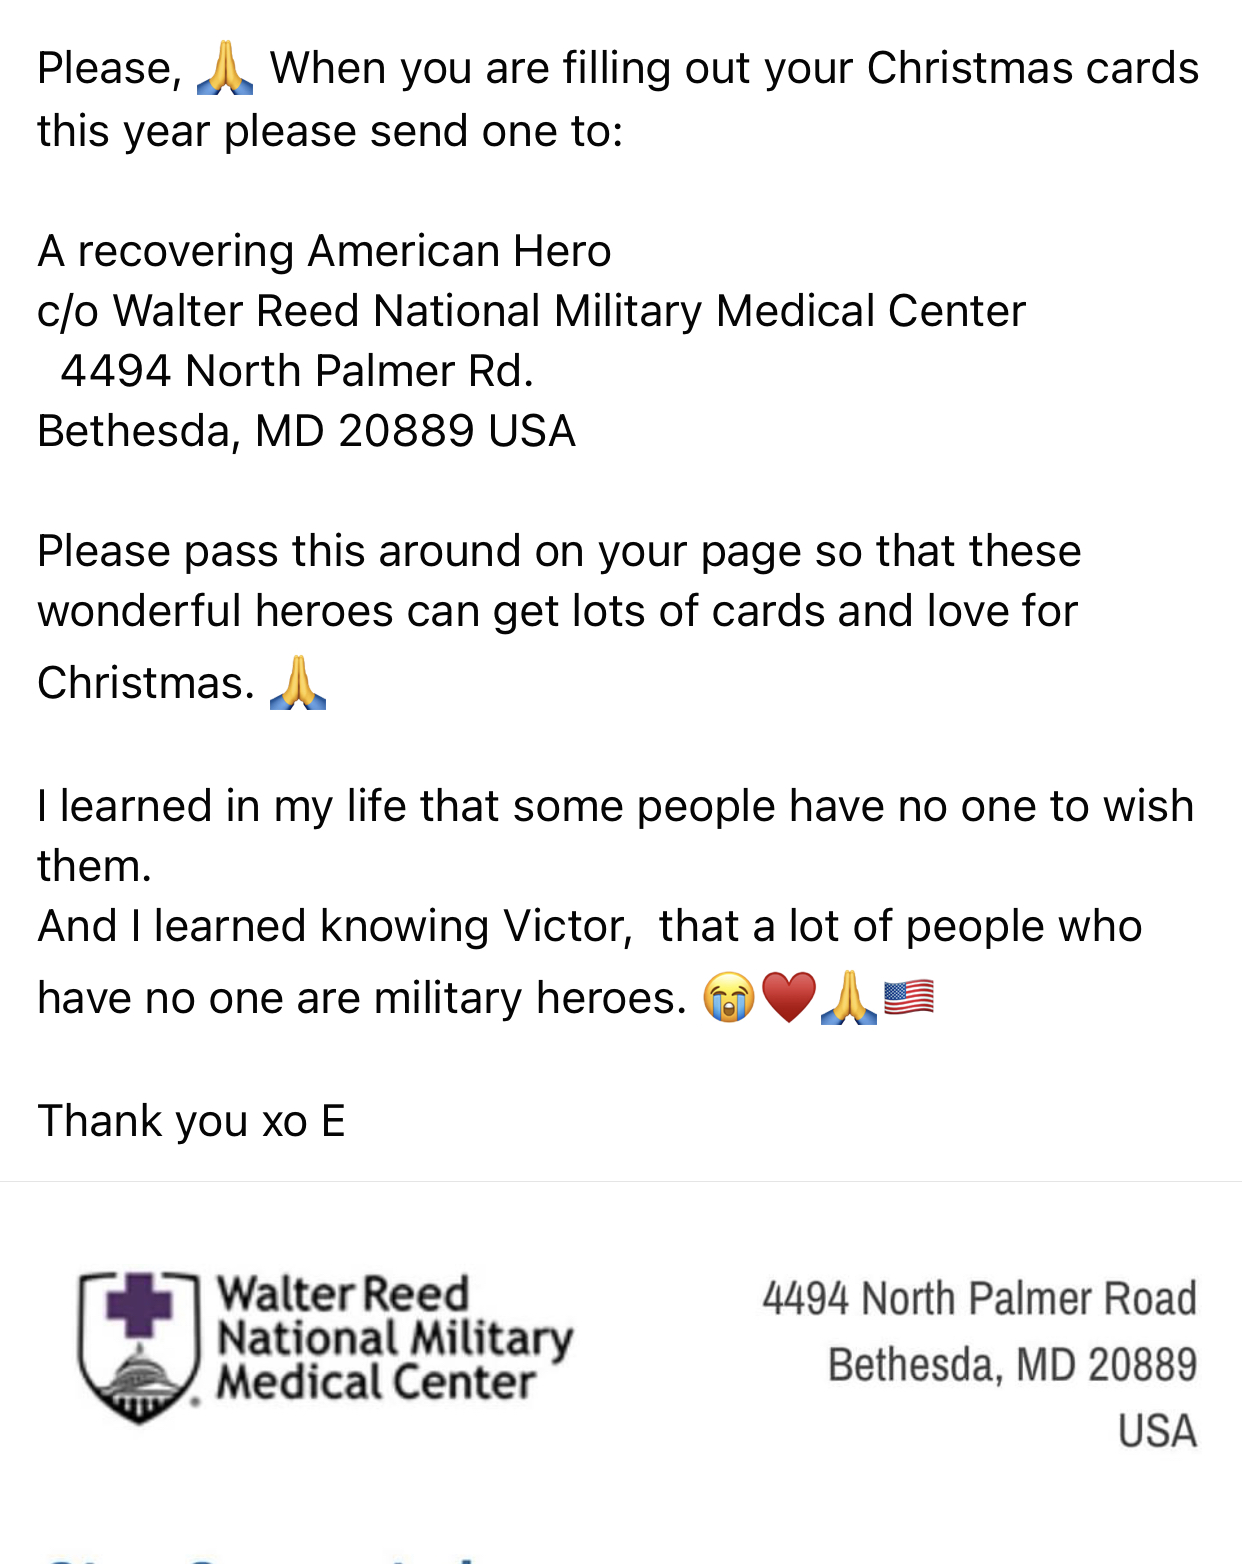 Victor loved the military! <br />
Please honor at least one veteran with a card and fill it with love! ♥️<br />
Remember the 2,403 that died at Pearl Harbor.